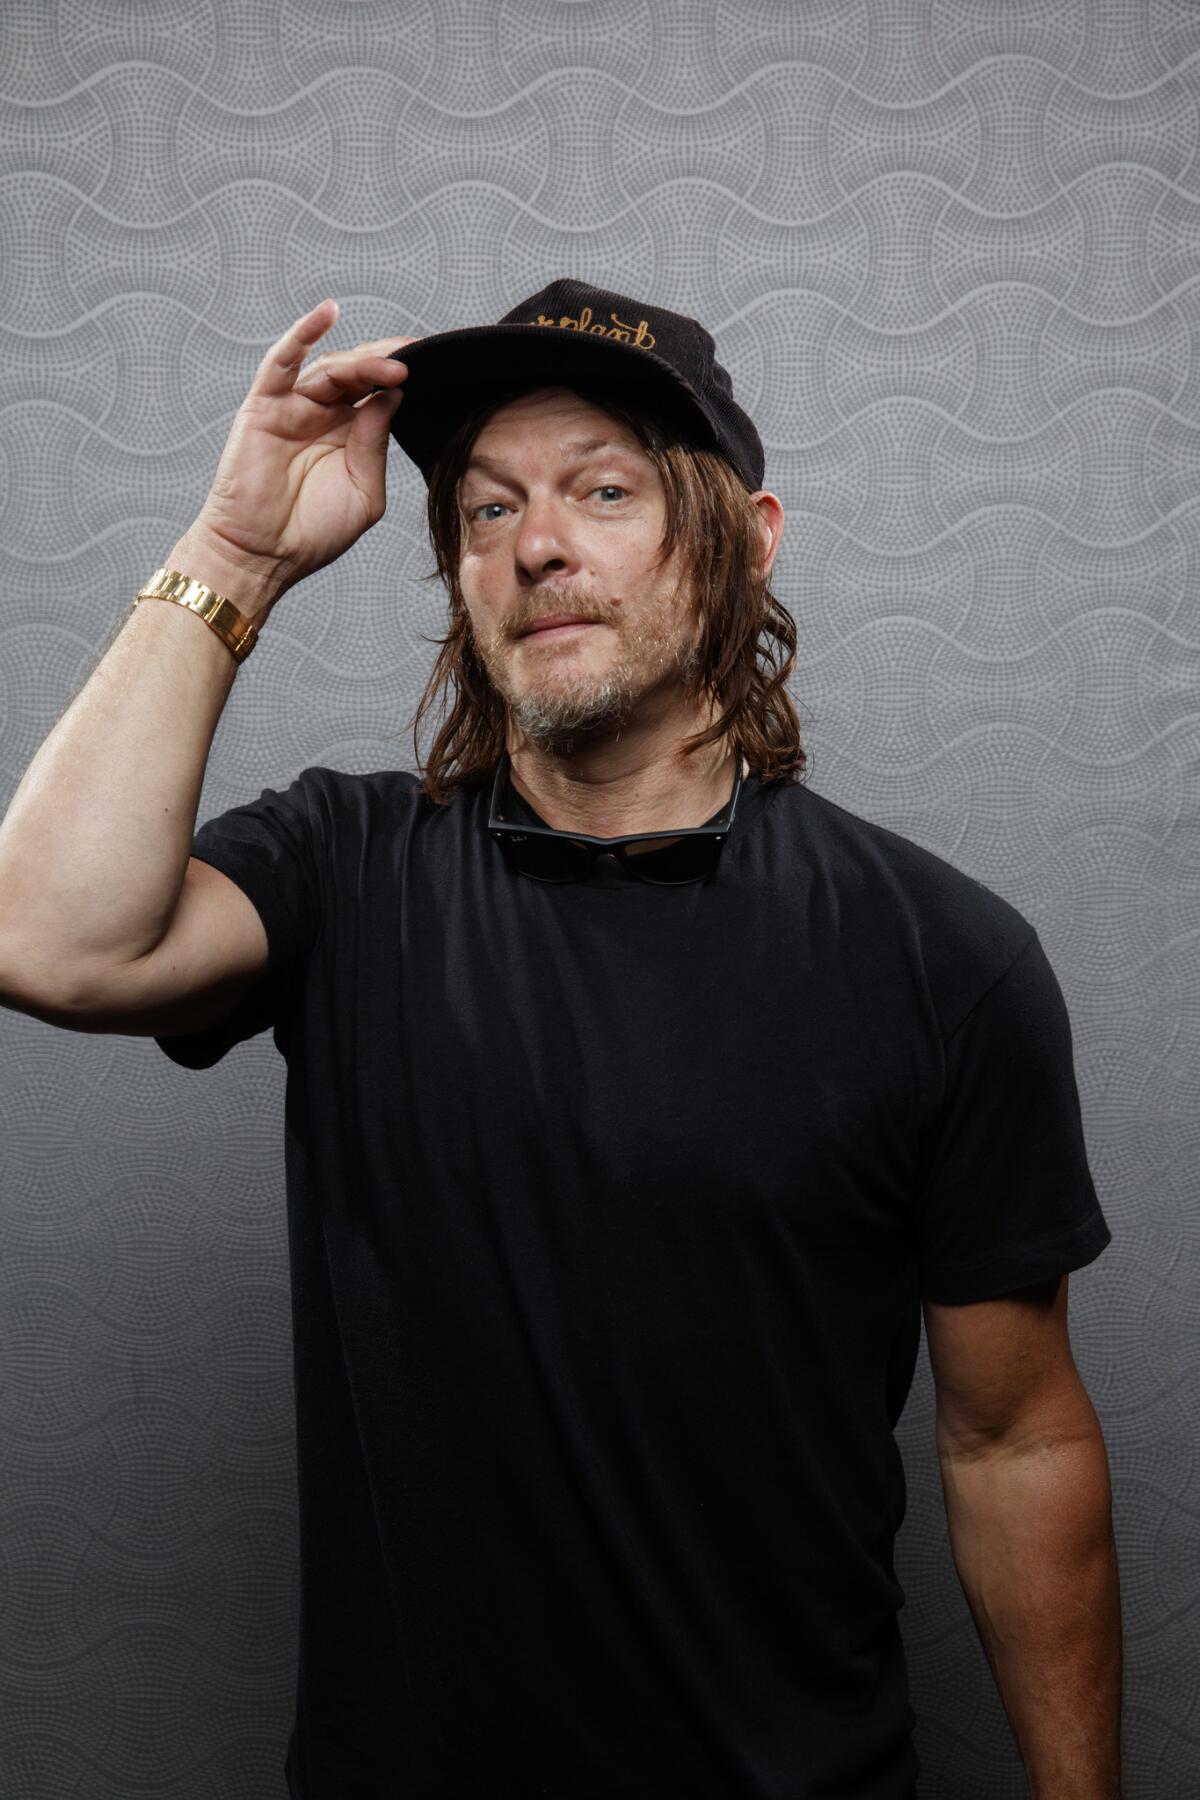 Norman Reedus from the television series "The Walking Dead."